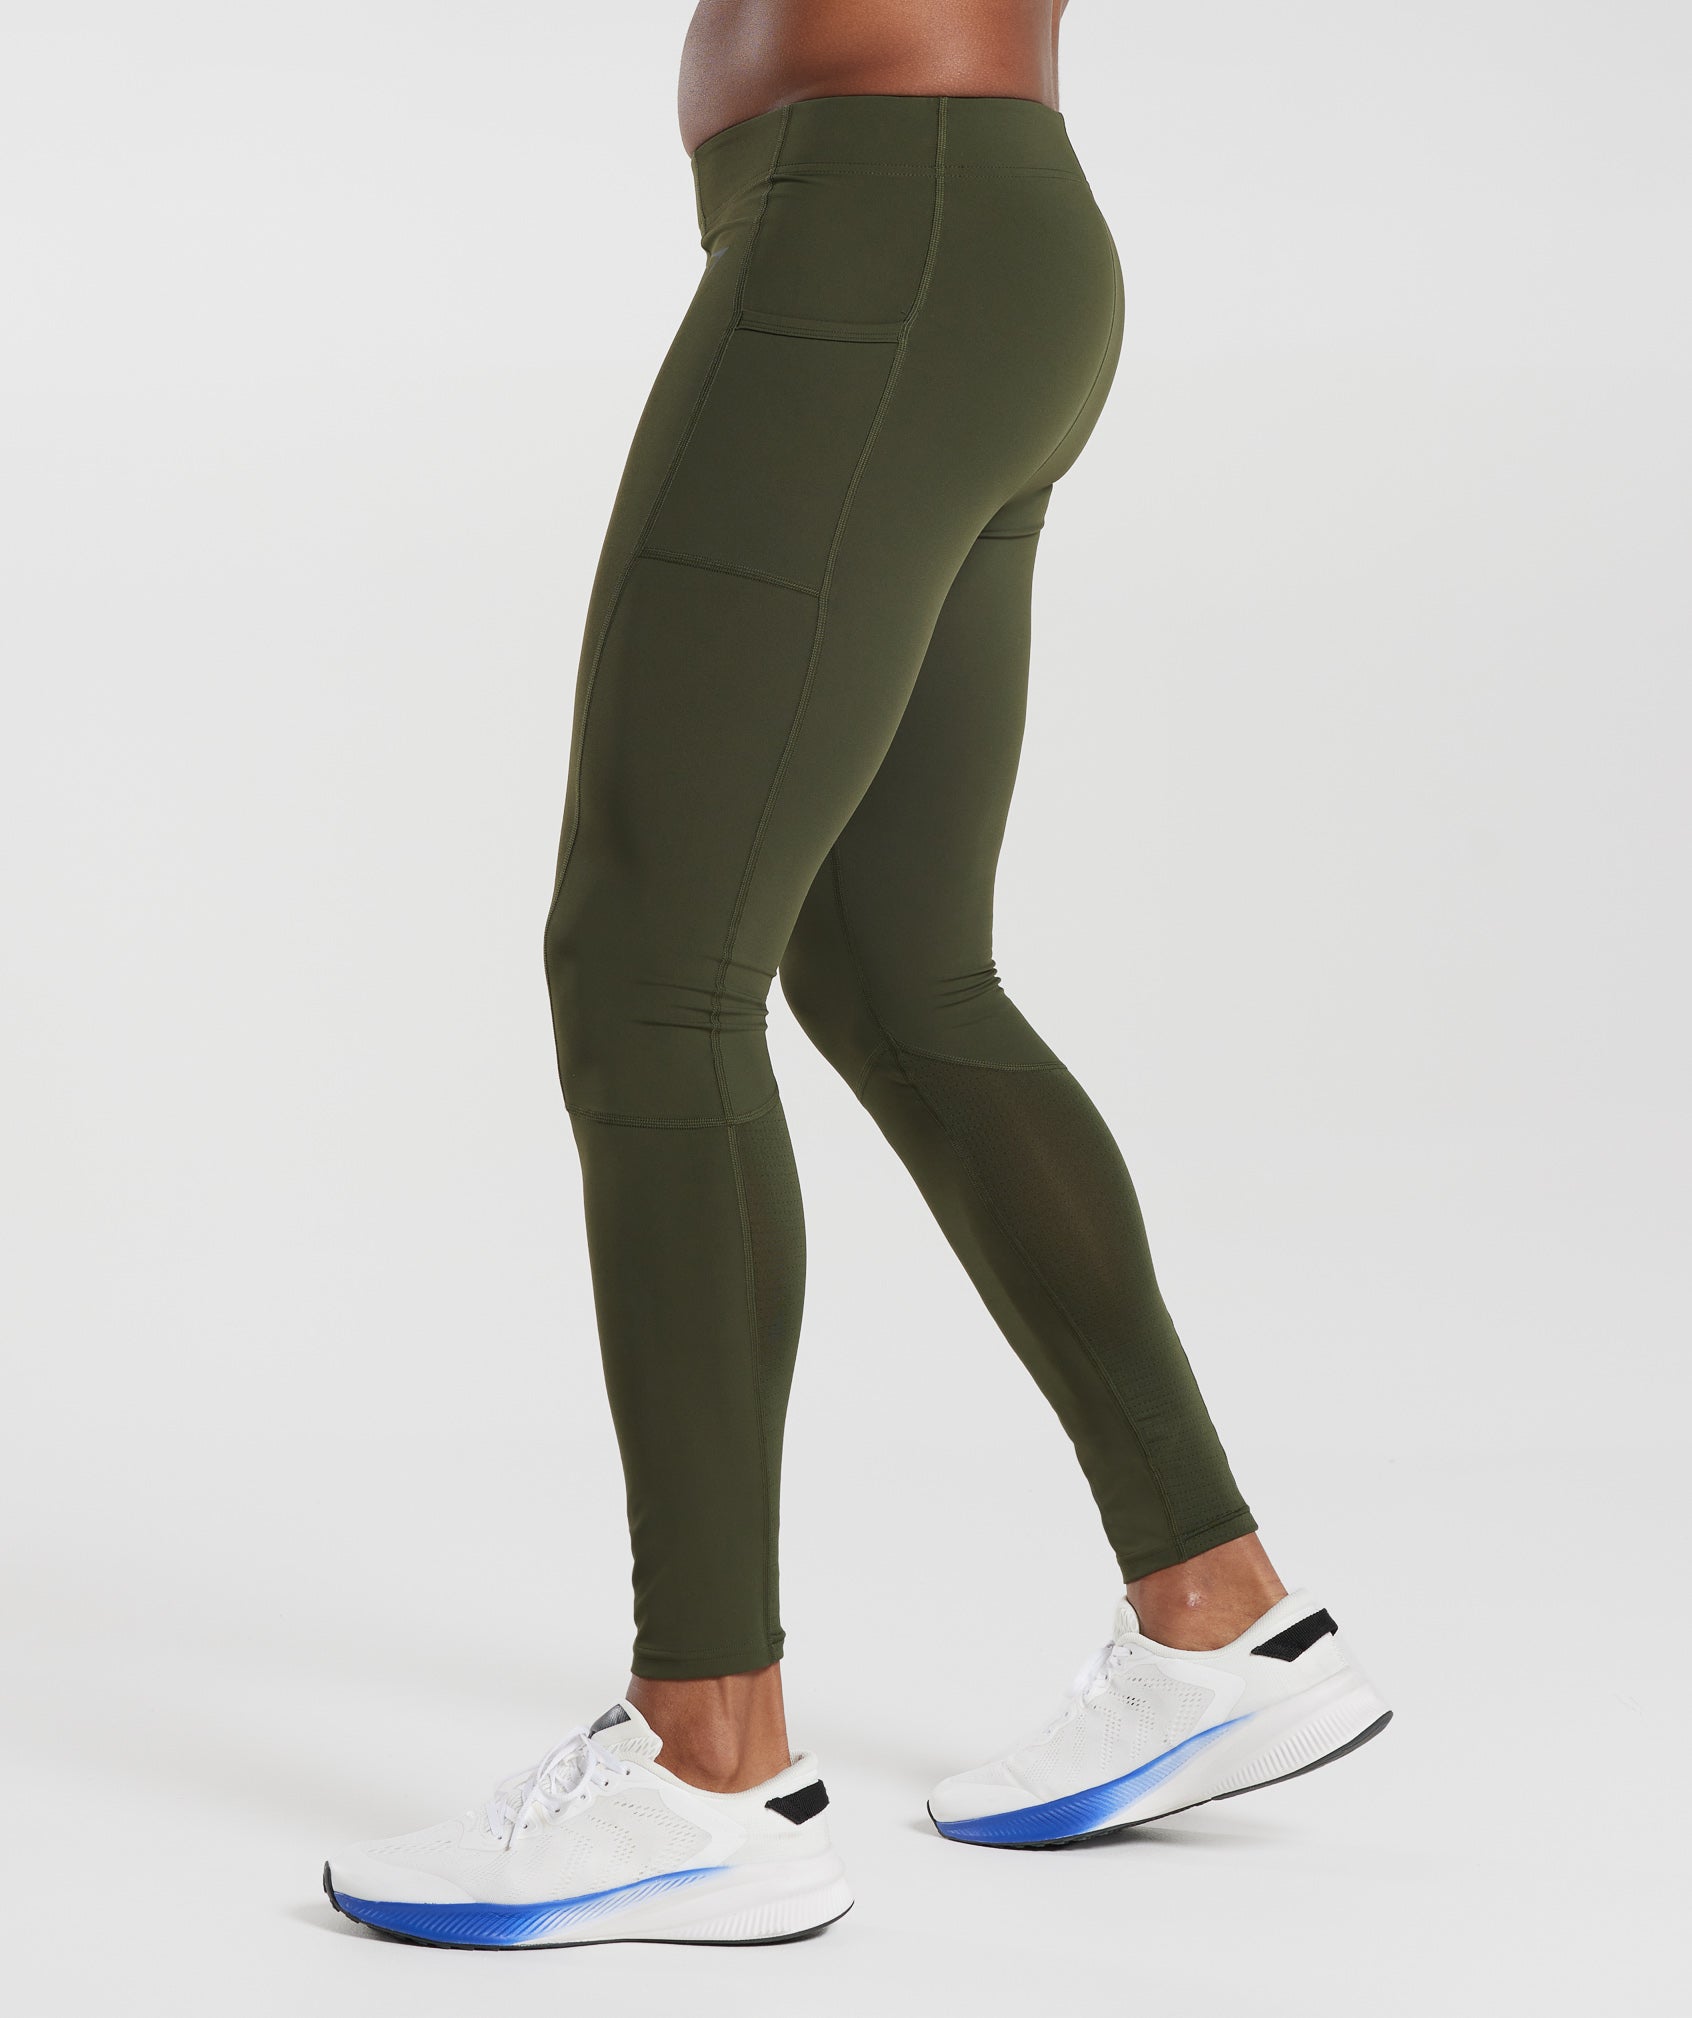 Control Baselayer Leggings in Winter Olive - view 3